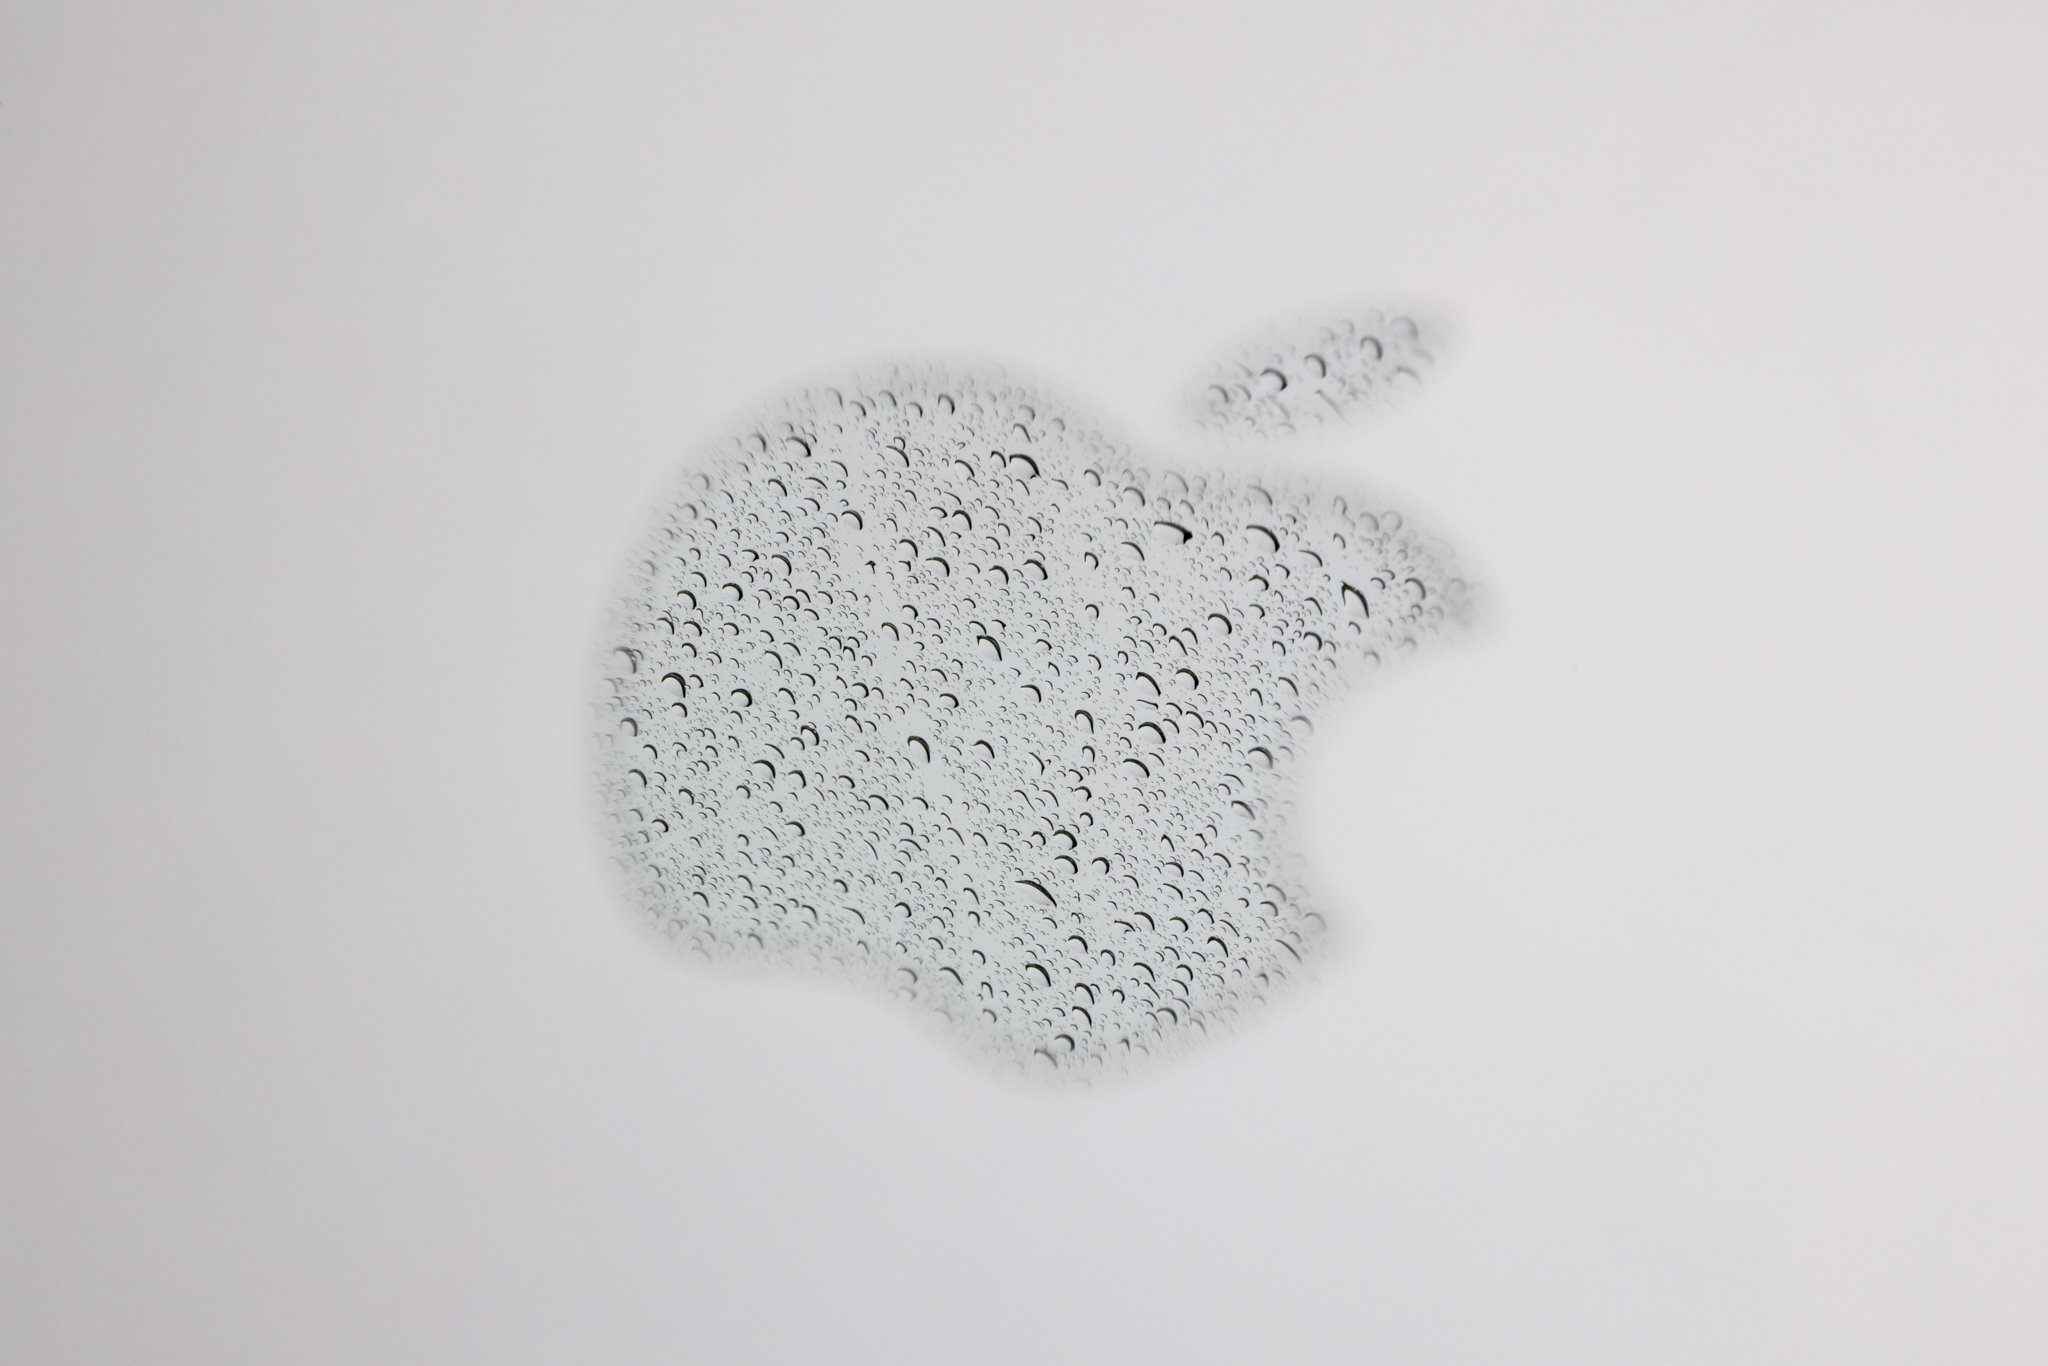 A reflection of rain in the Apple logo on a laptop photographed at f/25